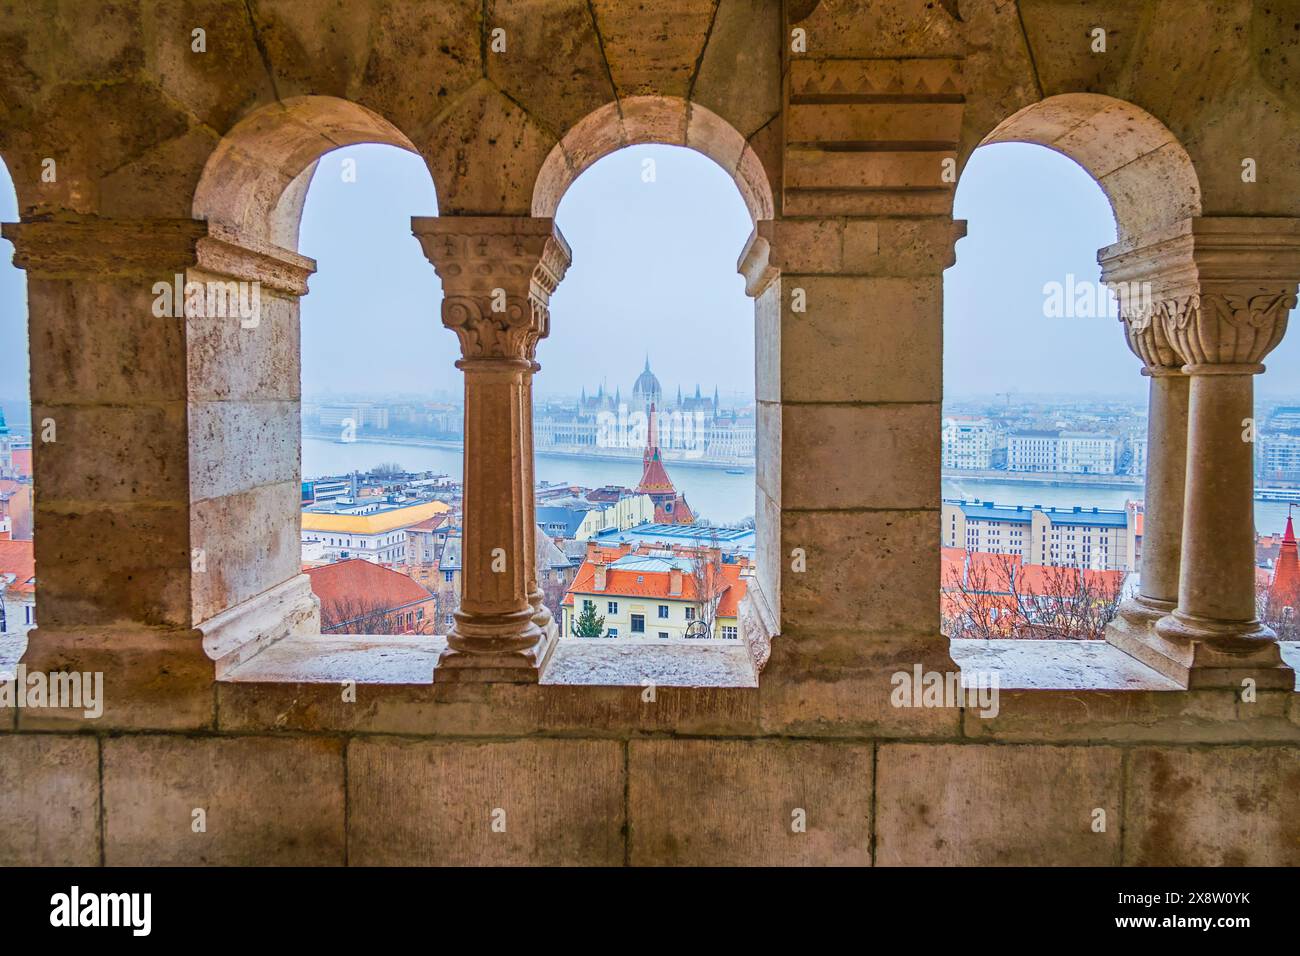 The view through the windows of the arcade at Fisherman's Bastion, showcasing Parliament, houses and the Danube River in Budapest, Hungary. Stock Photo